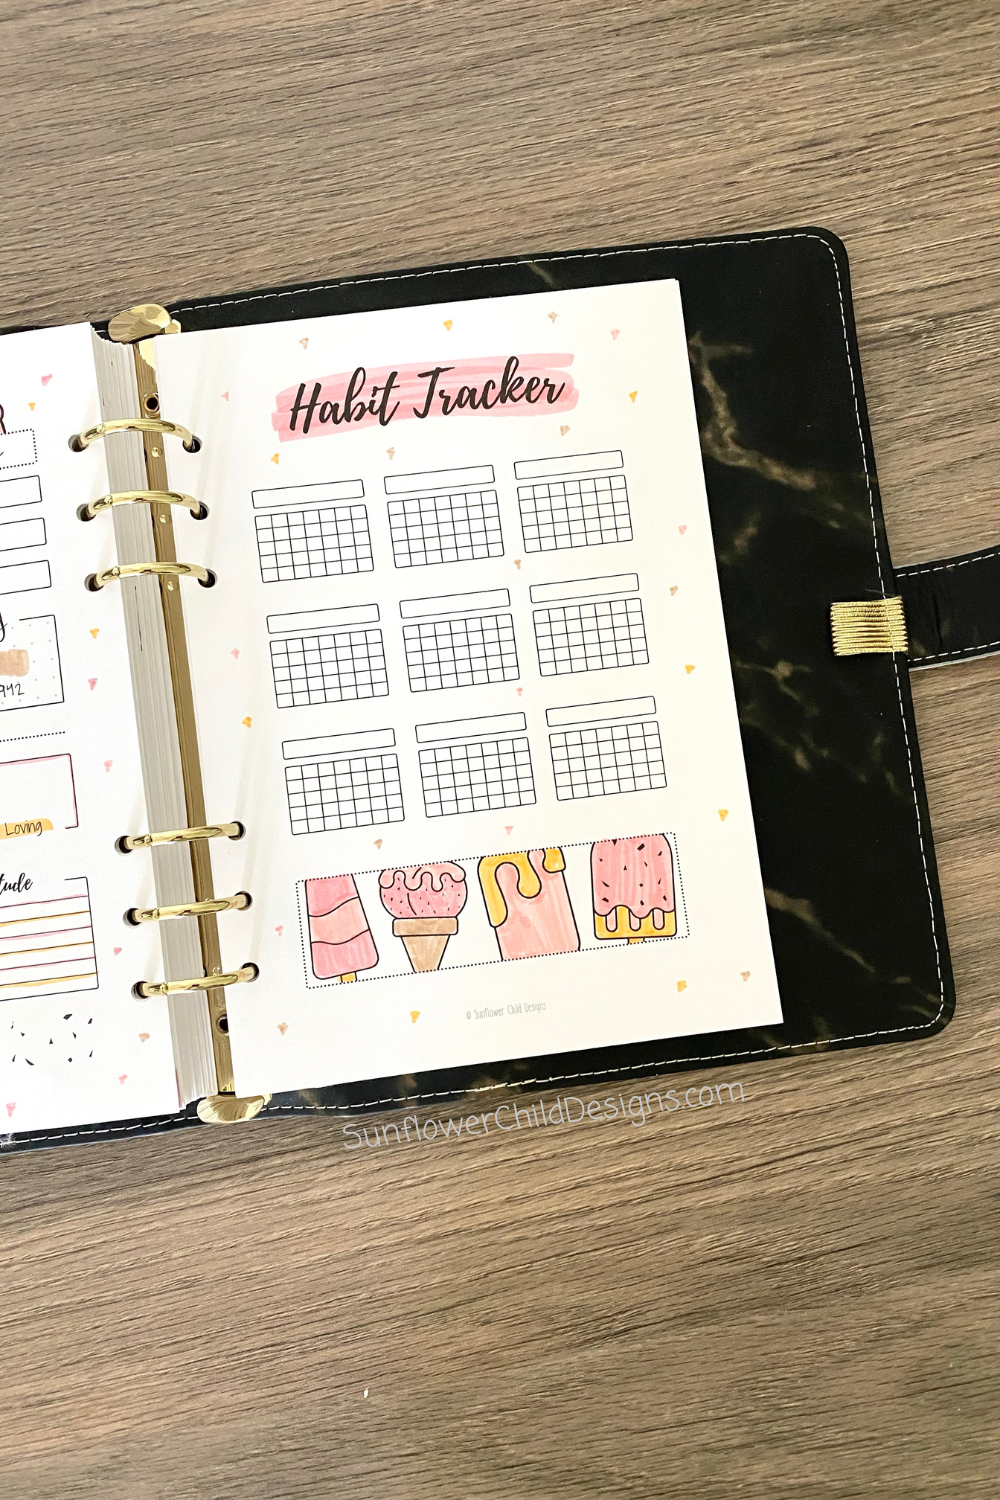 Spiraldex PRINTABLE PDF Planner Bujo Pages Made for 6-ring 